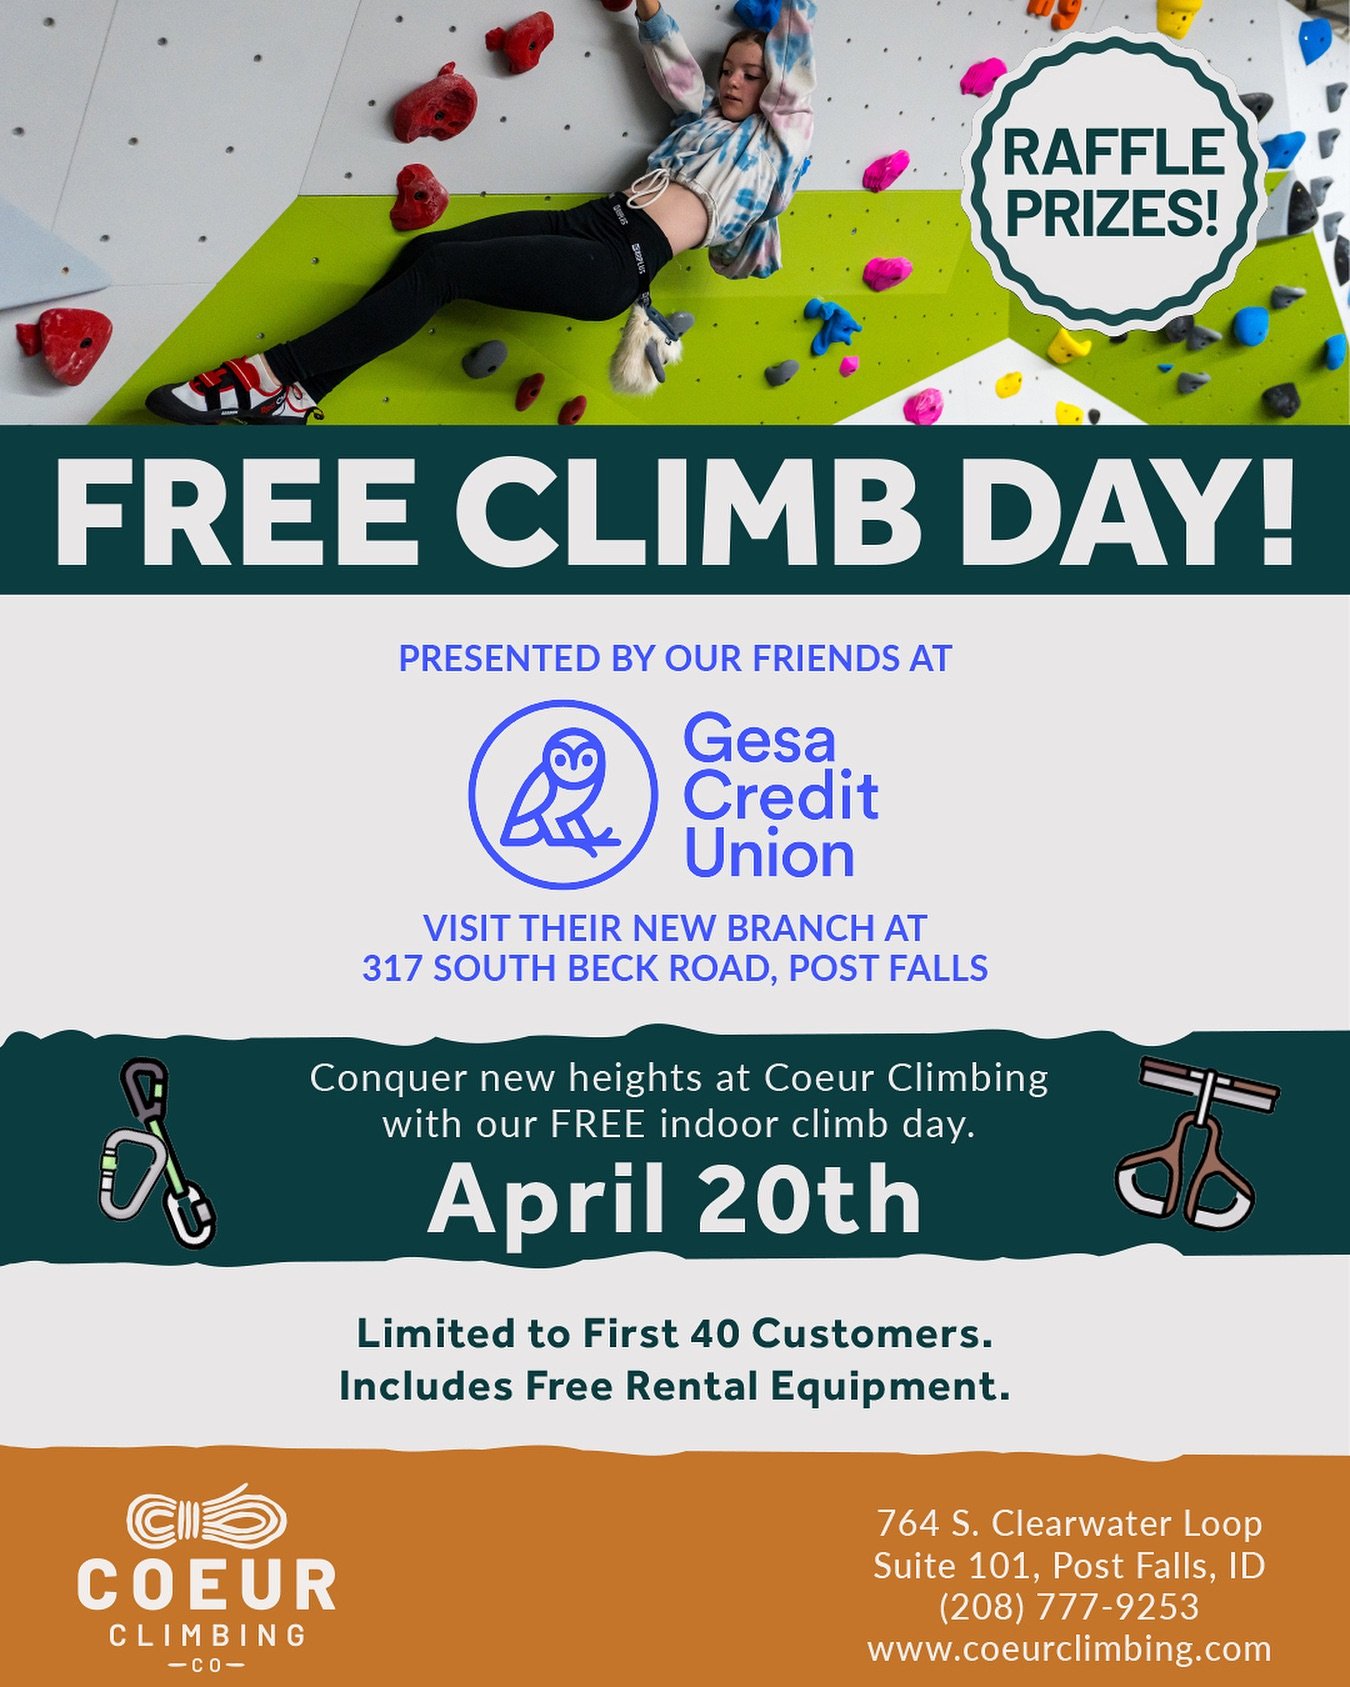 A free climbing day? Oh yes! 
We&rsquo;ve partnered with our friends over at Gesa Credit Union to give the gift of climbing this Saturday April 20th! 

Here&rsquo;s the deal: the first 40 day pass users get in for free with rentals included! Coeur Cl